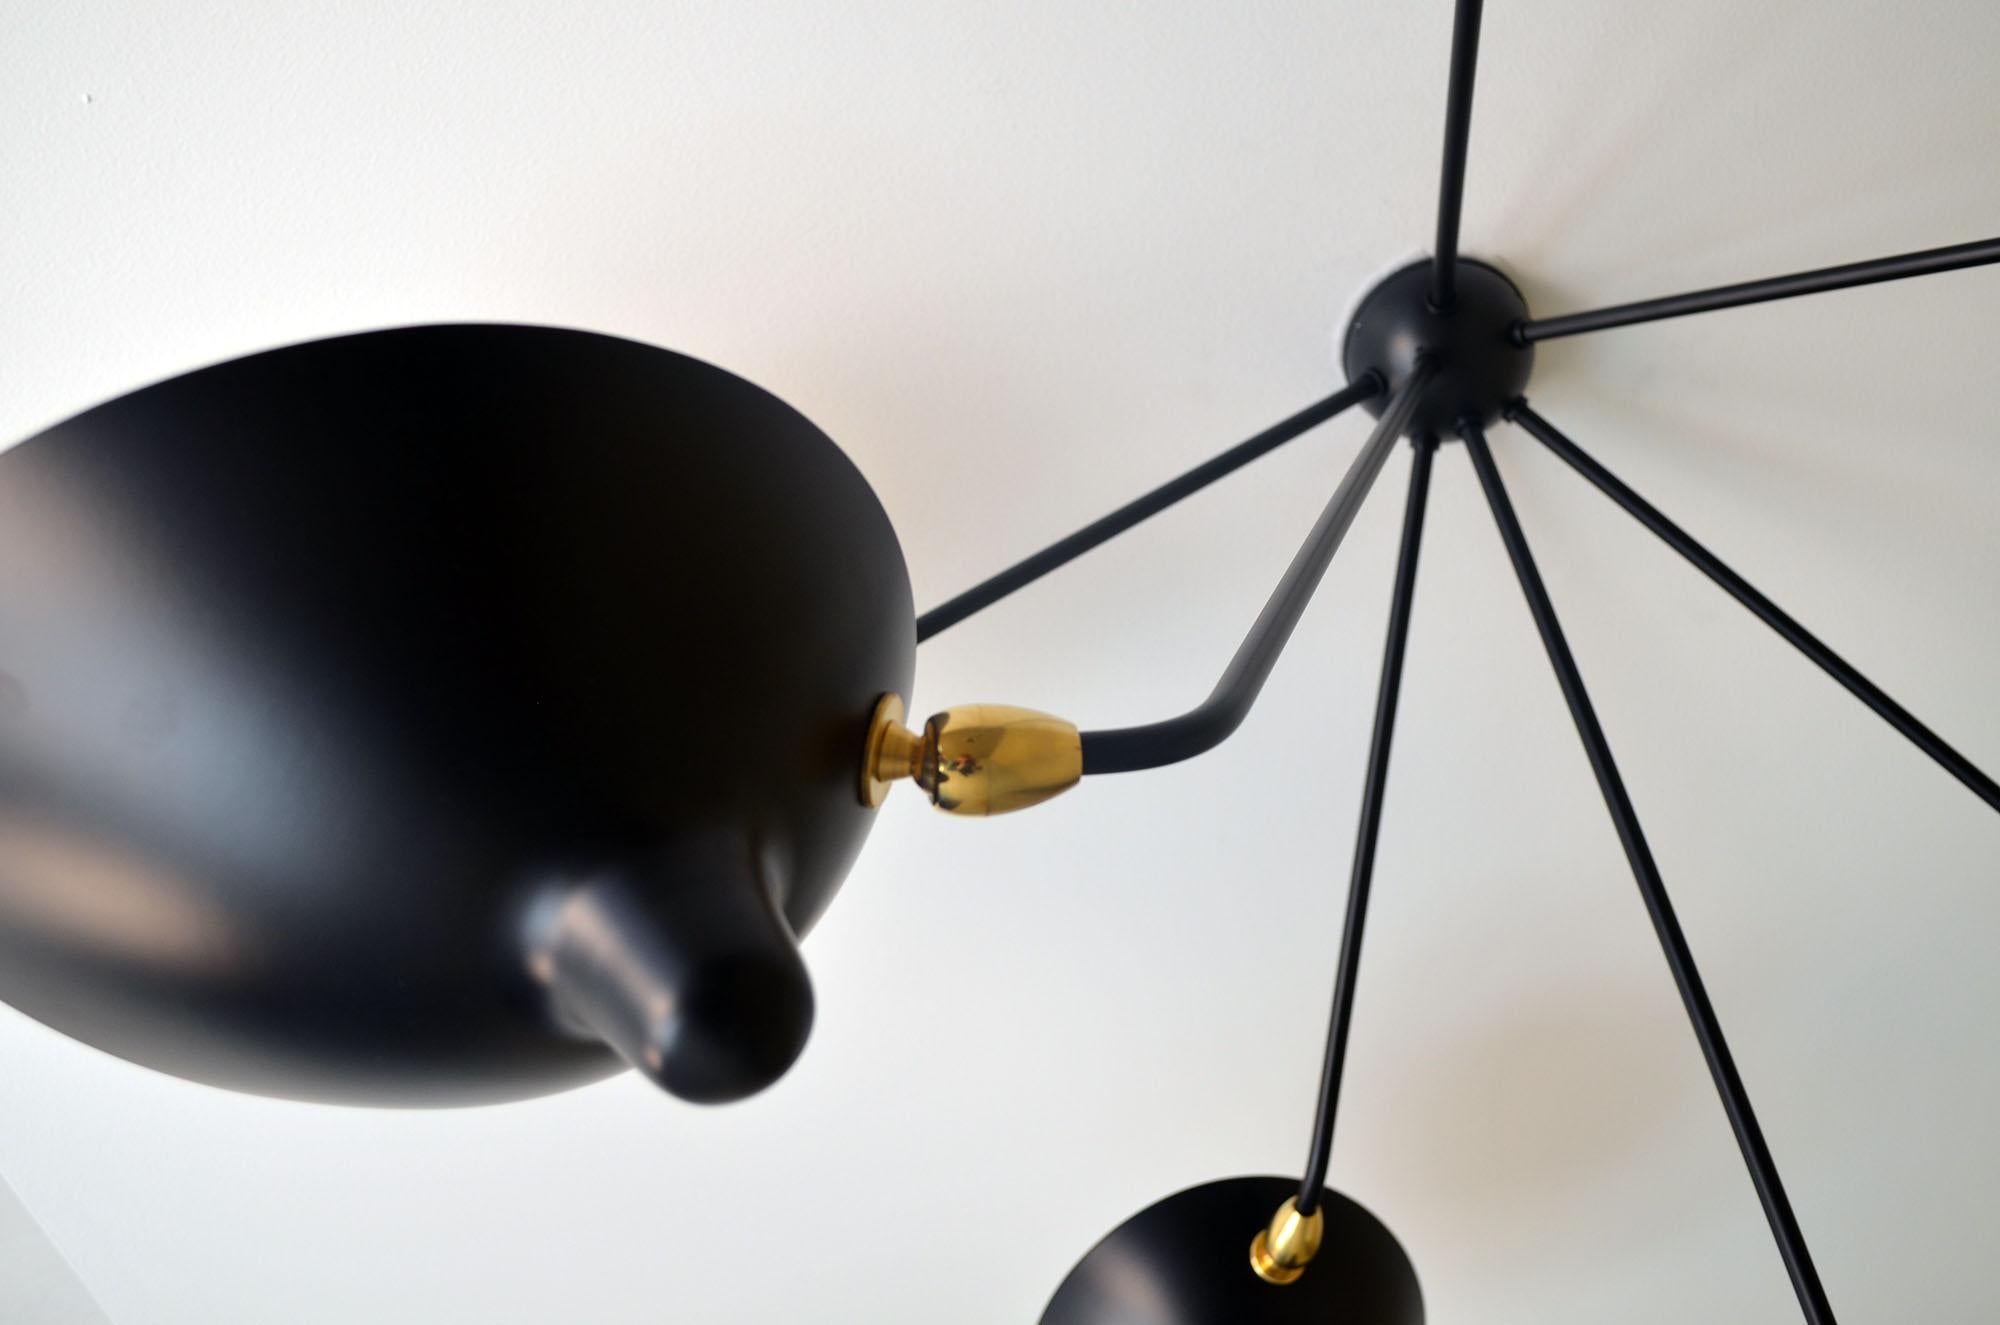 Painted Serge Mouille - Black or White Spider Ceiling Lamp with 5 Arms - IN STOCK! For Sale